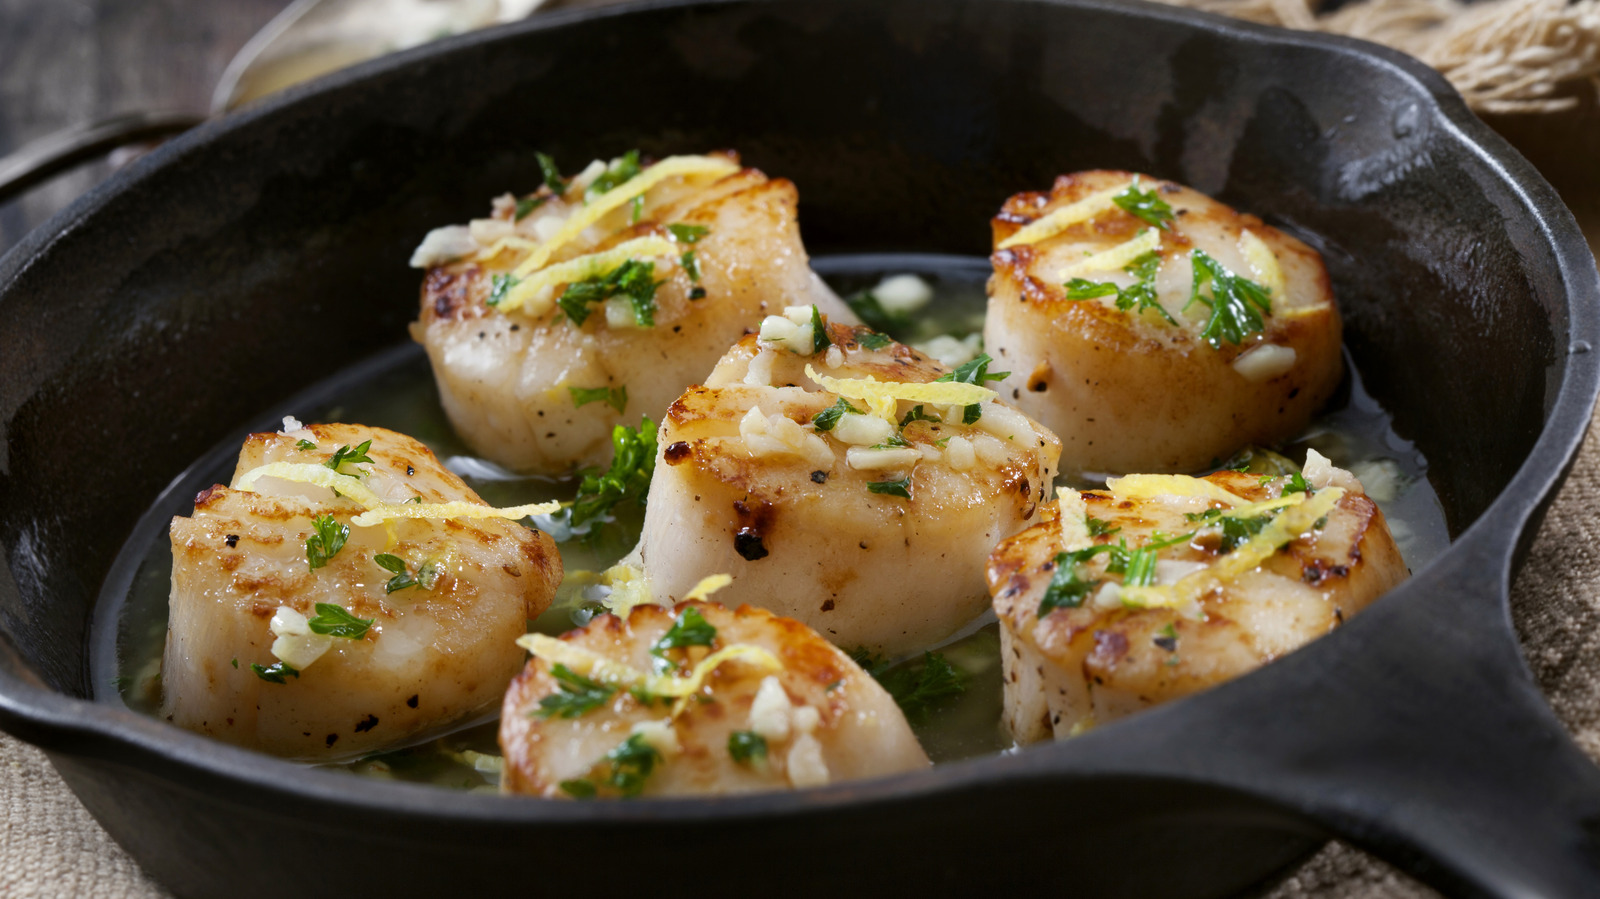 https://www.thedailymeal.com/img/gallery/14-mistakes-almost-everyone-makes-with-scallops/l-intro-1696451917.jpg